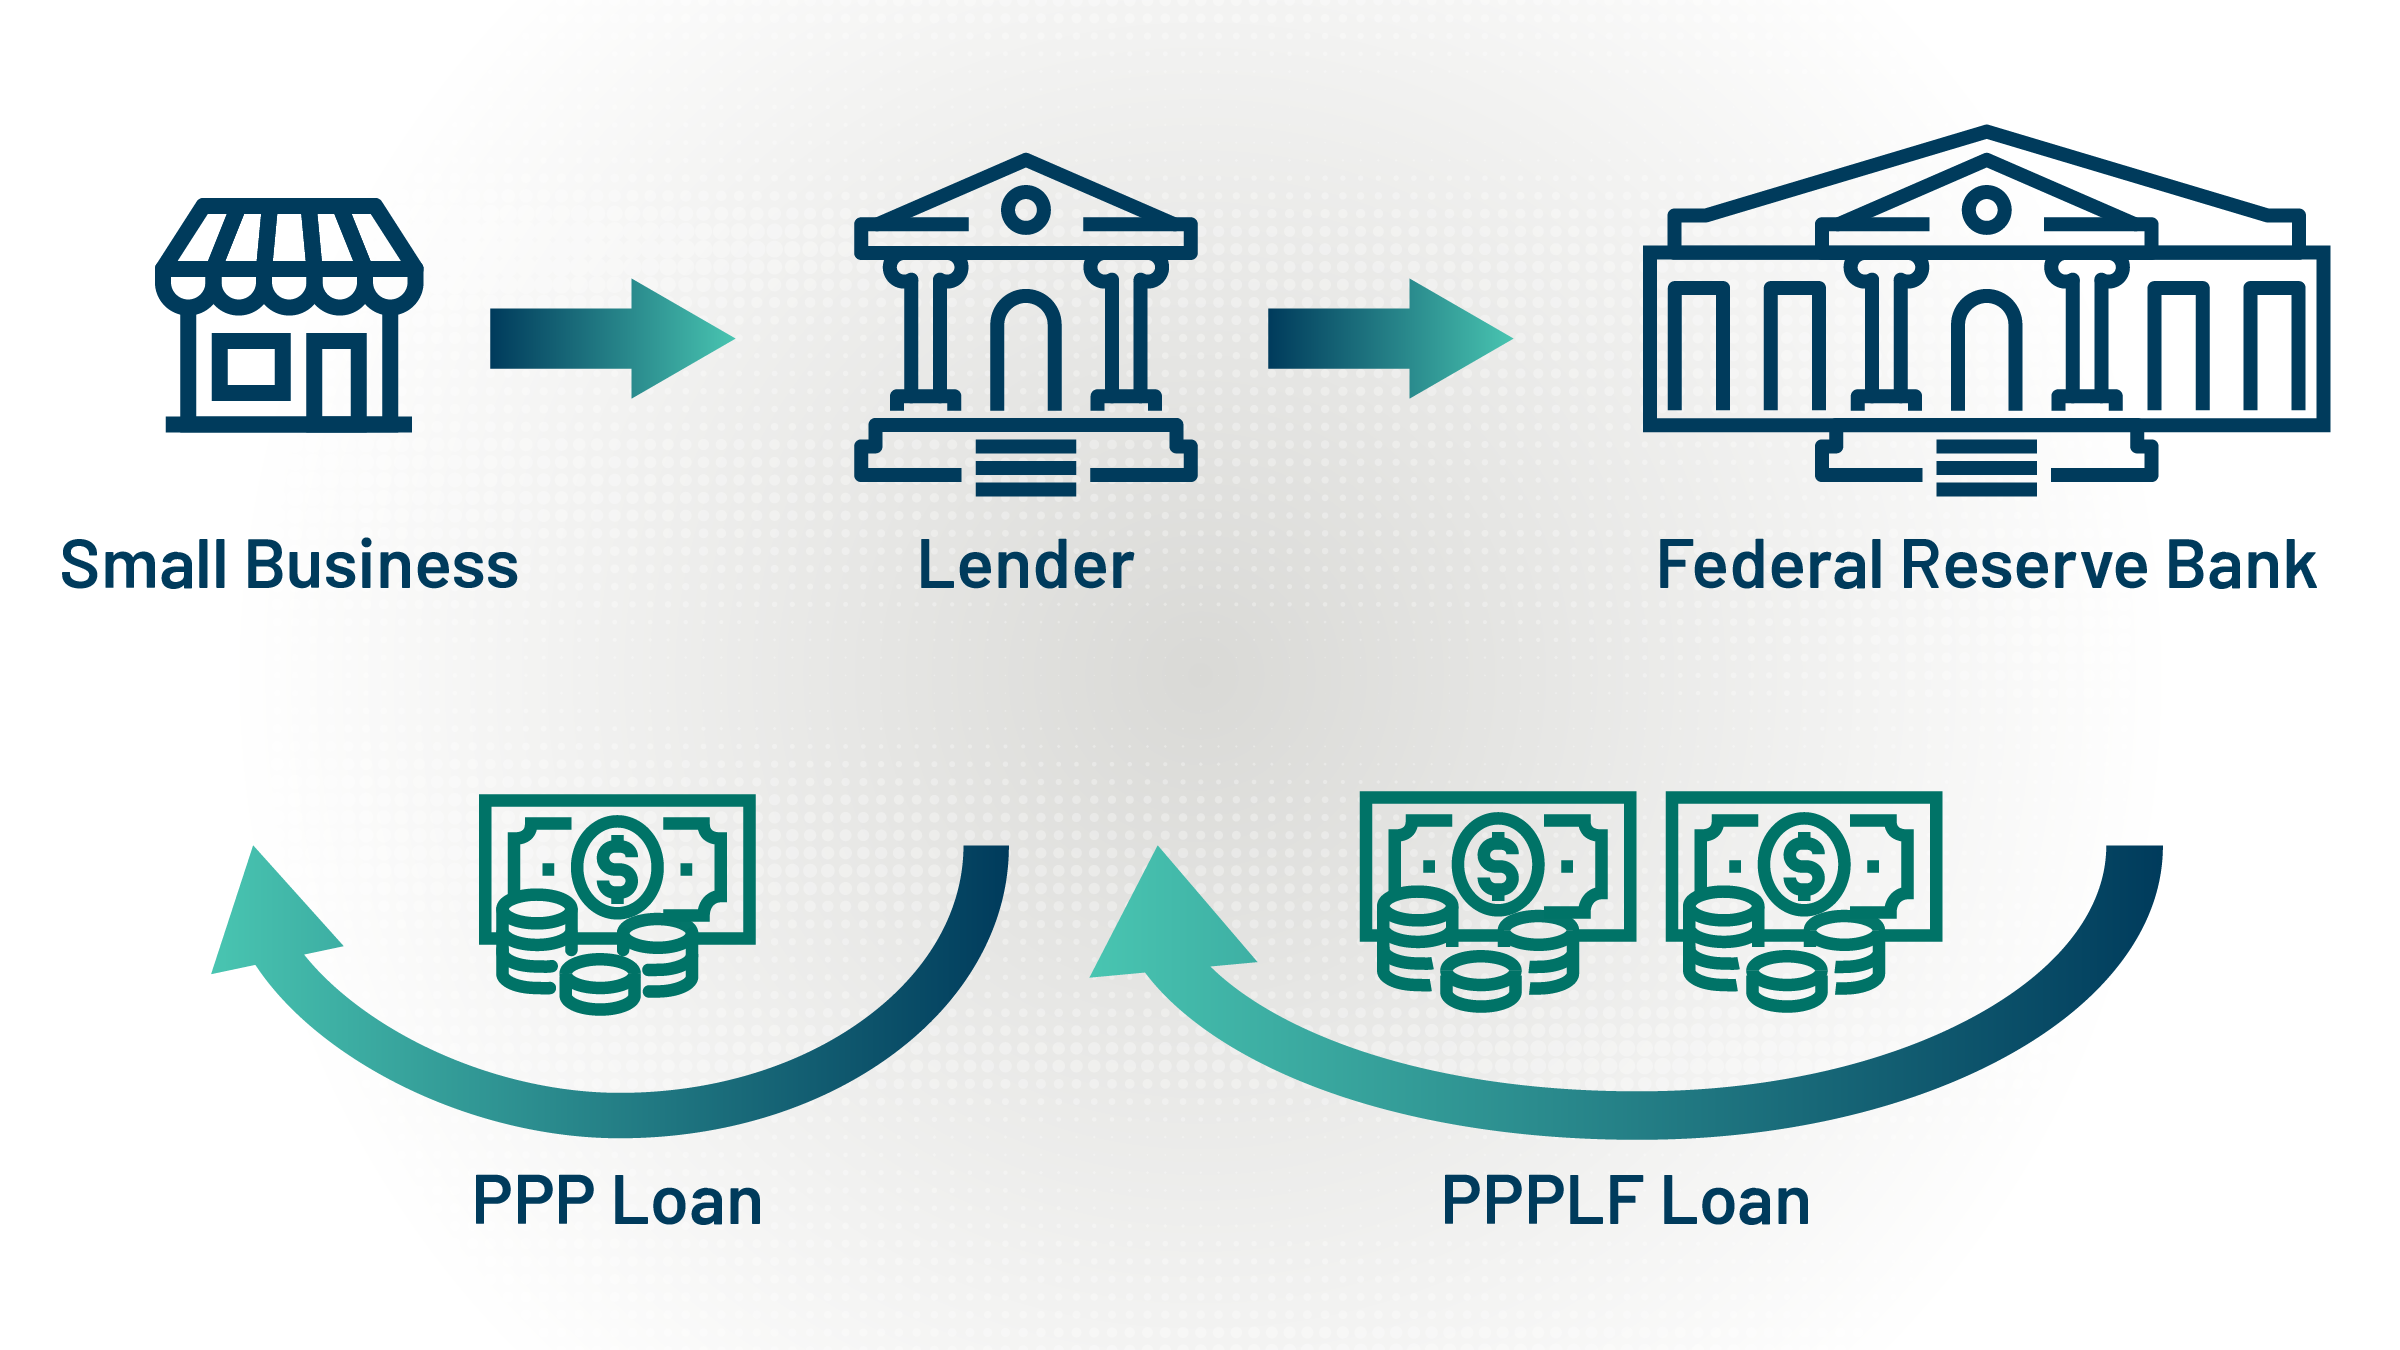 Infographic depicting the PPLF Loan process